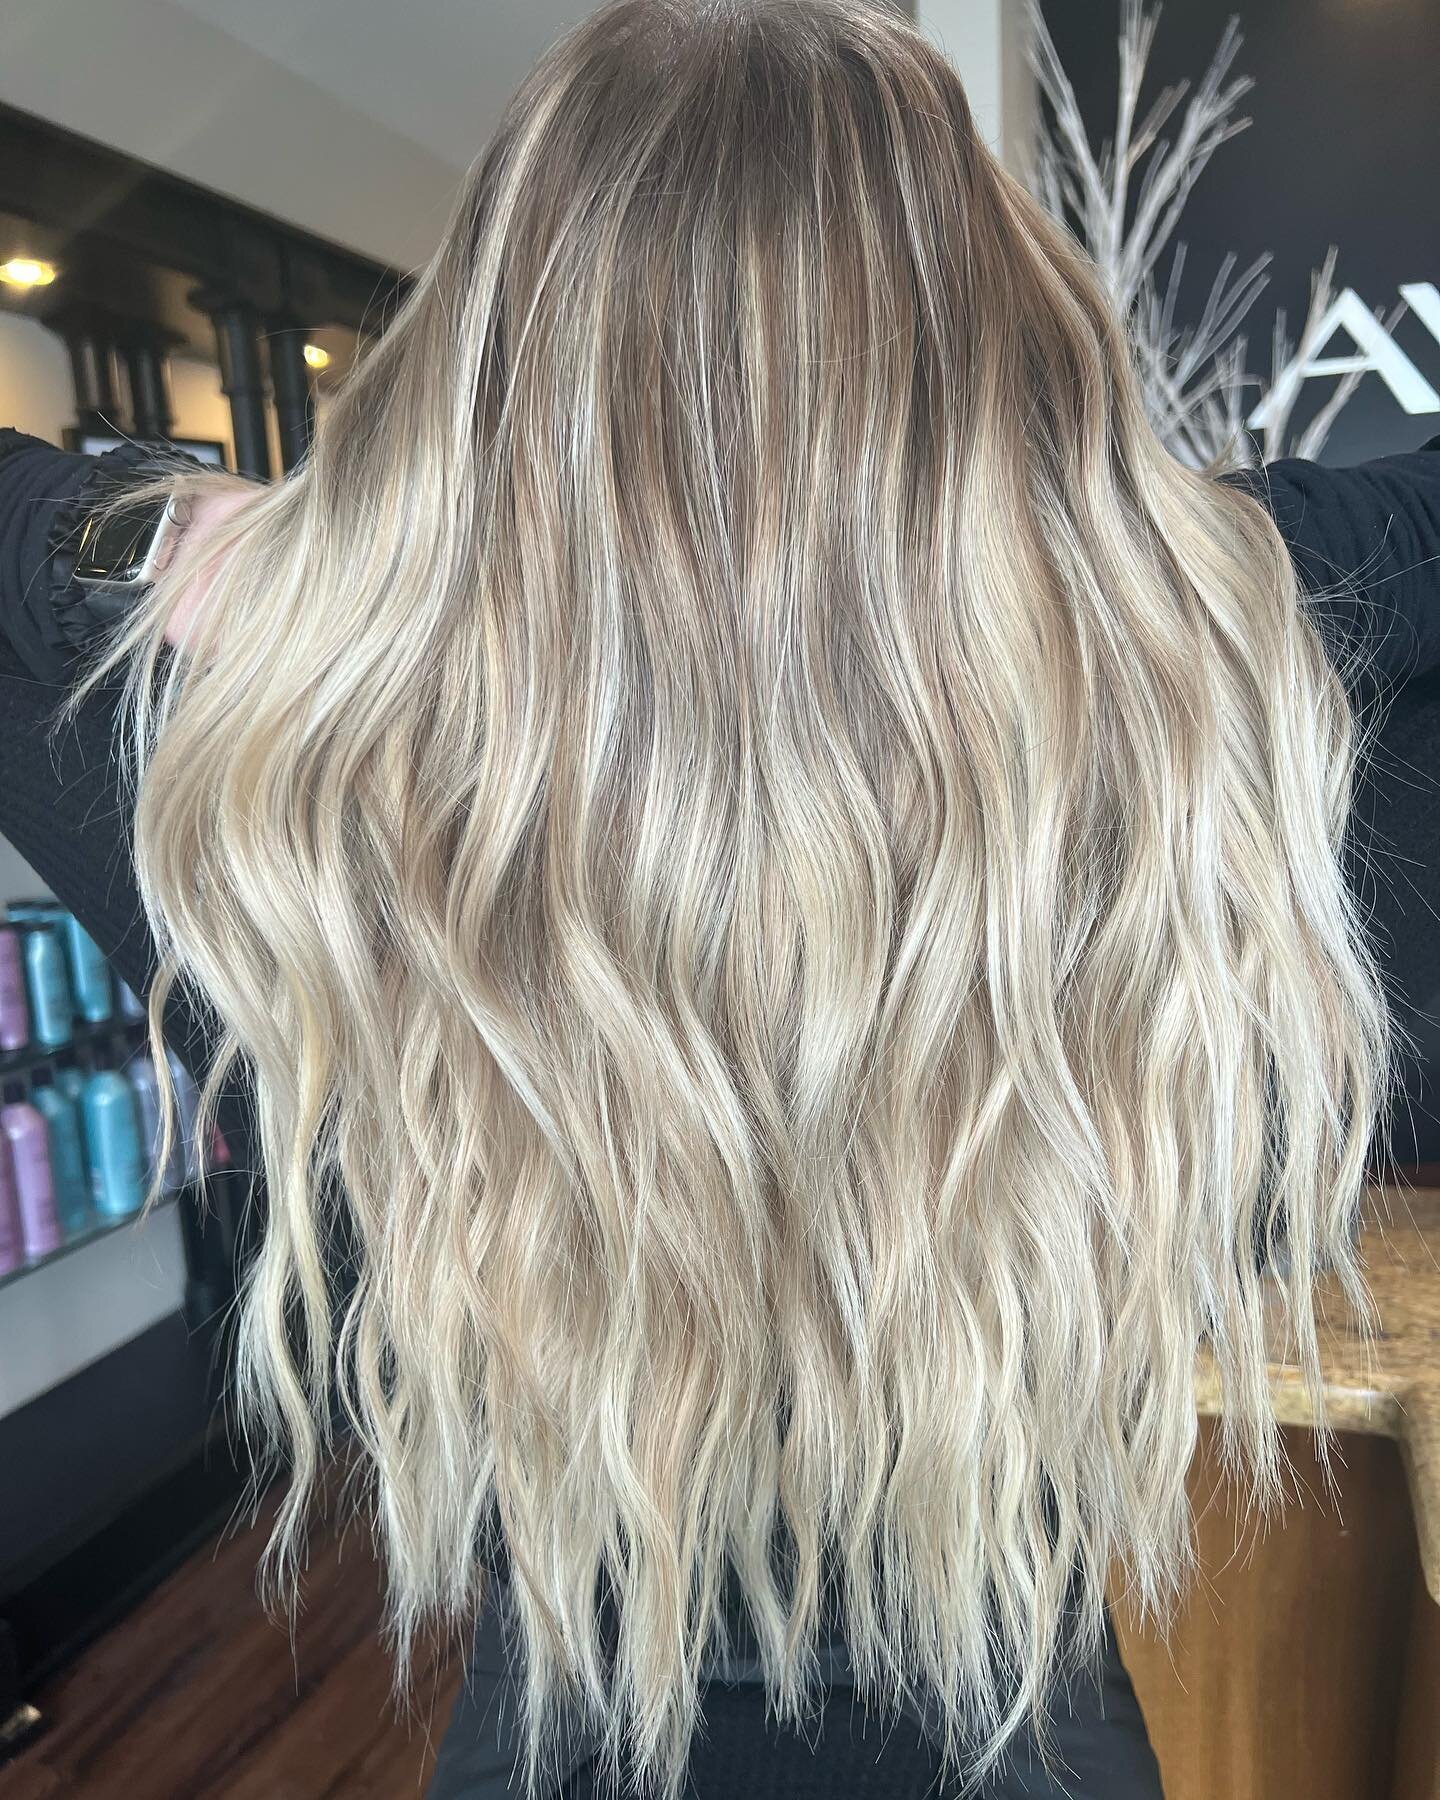 Who says you can&rsquo;t get length over night 🌙🌙🌙
Book your consultation today with Jen Pratt

#perfectressextensions #perfectress #perfectress_us #perfectresshairextensions #behindthechair #behindthechairstylist #jenpratt ##phillyhairstylist #co